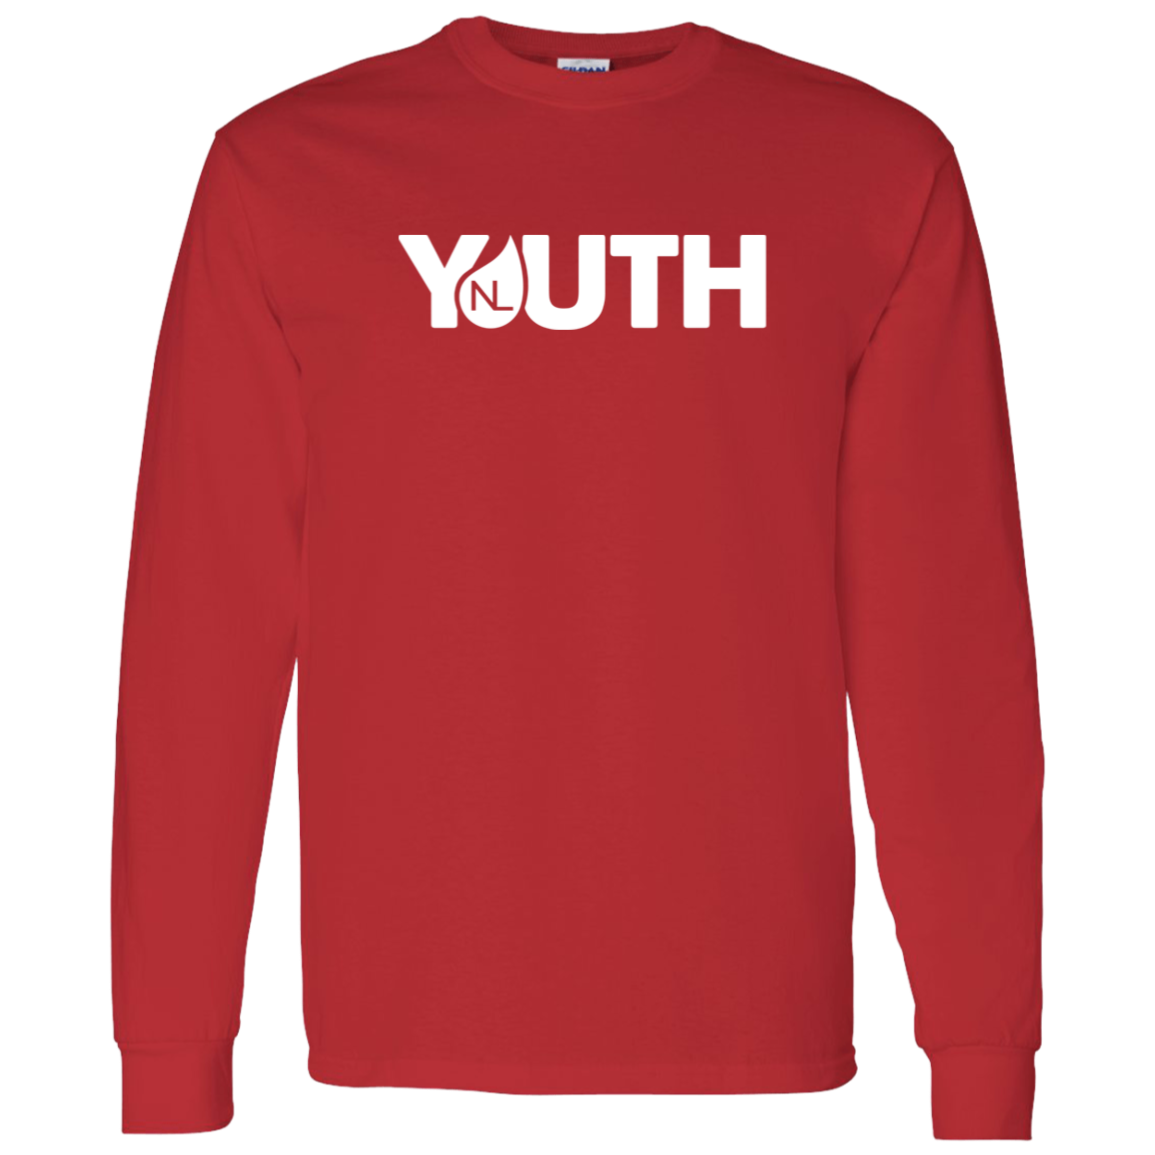 New Life YOUTH - Long Sleeves